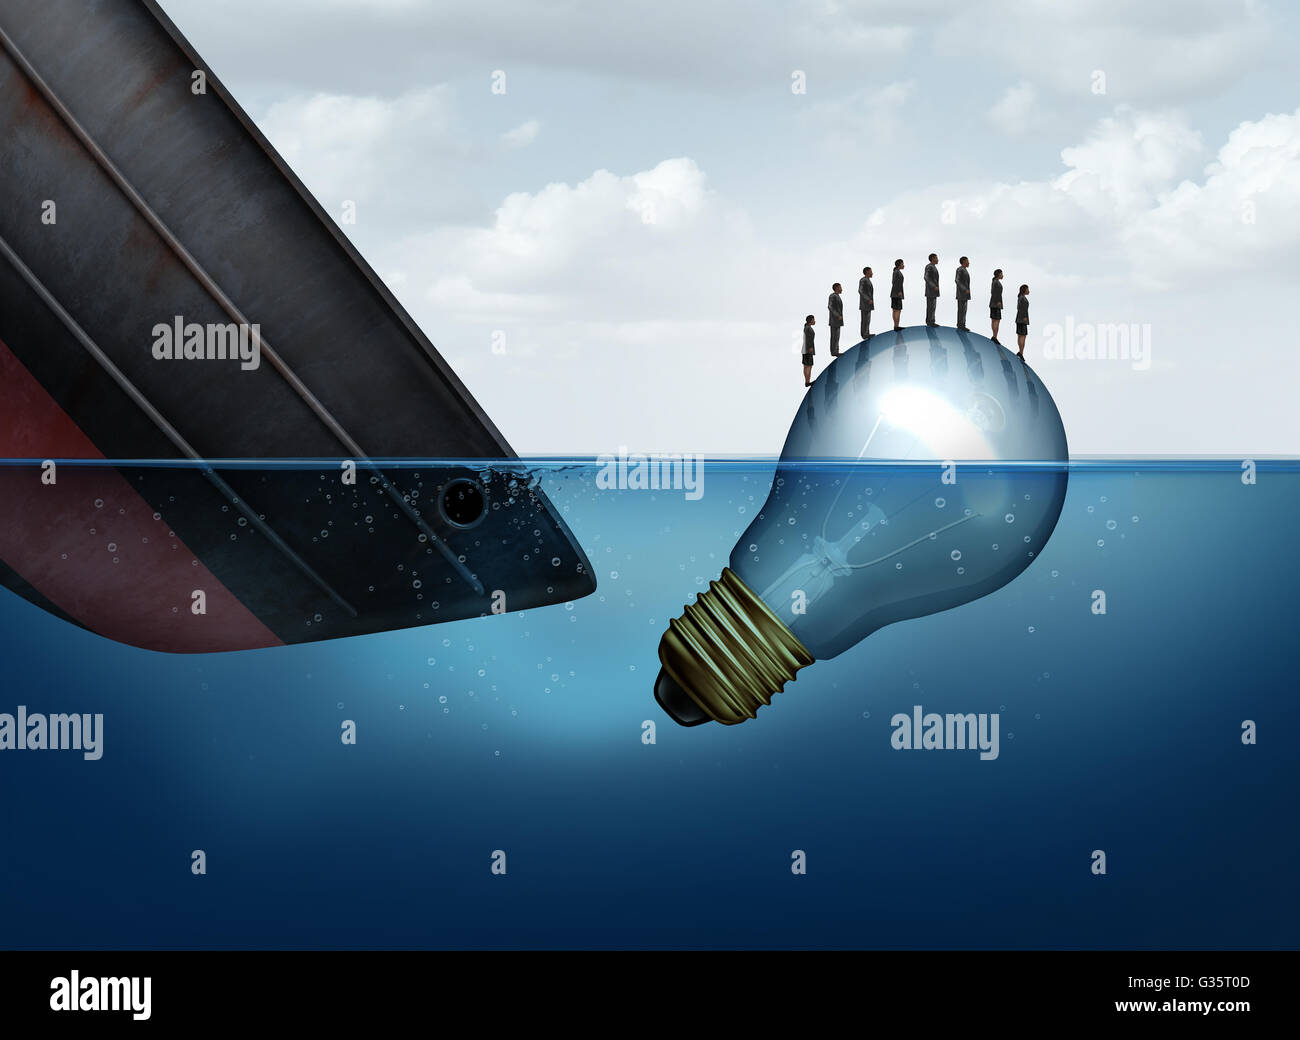 Business rescue solution as a sinking ship and a floating lightbulb rescuing businesspeople as an insurance metaphor for surviving tough times as a group with 3D illustration elements. Stock Photo